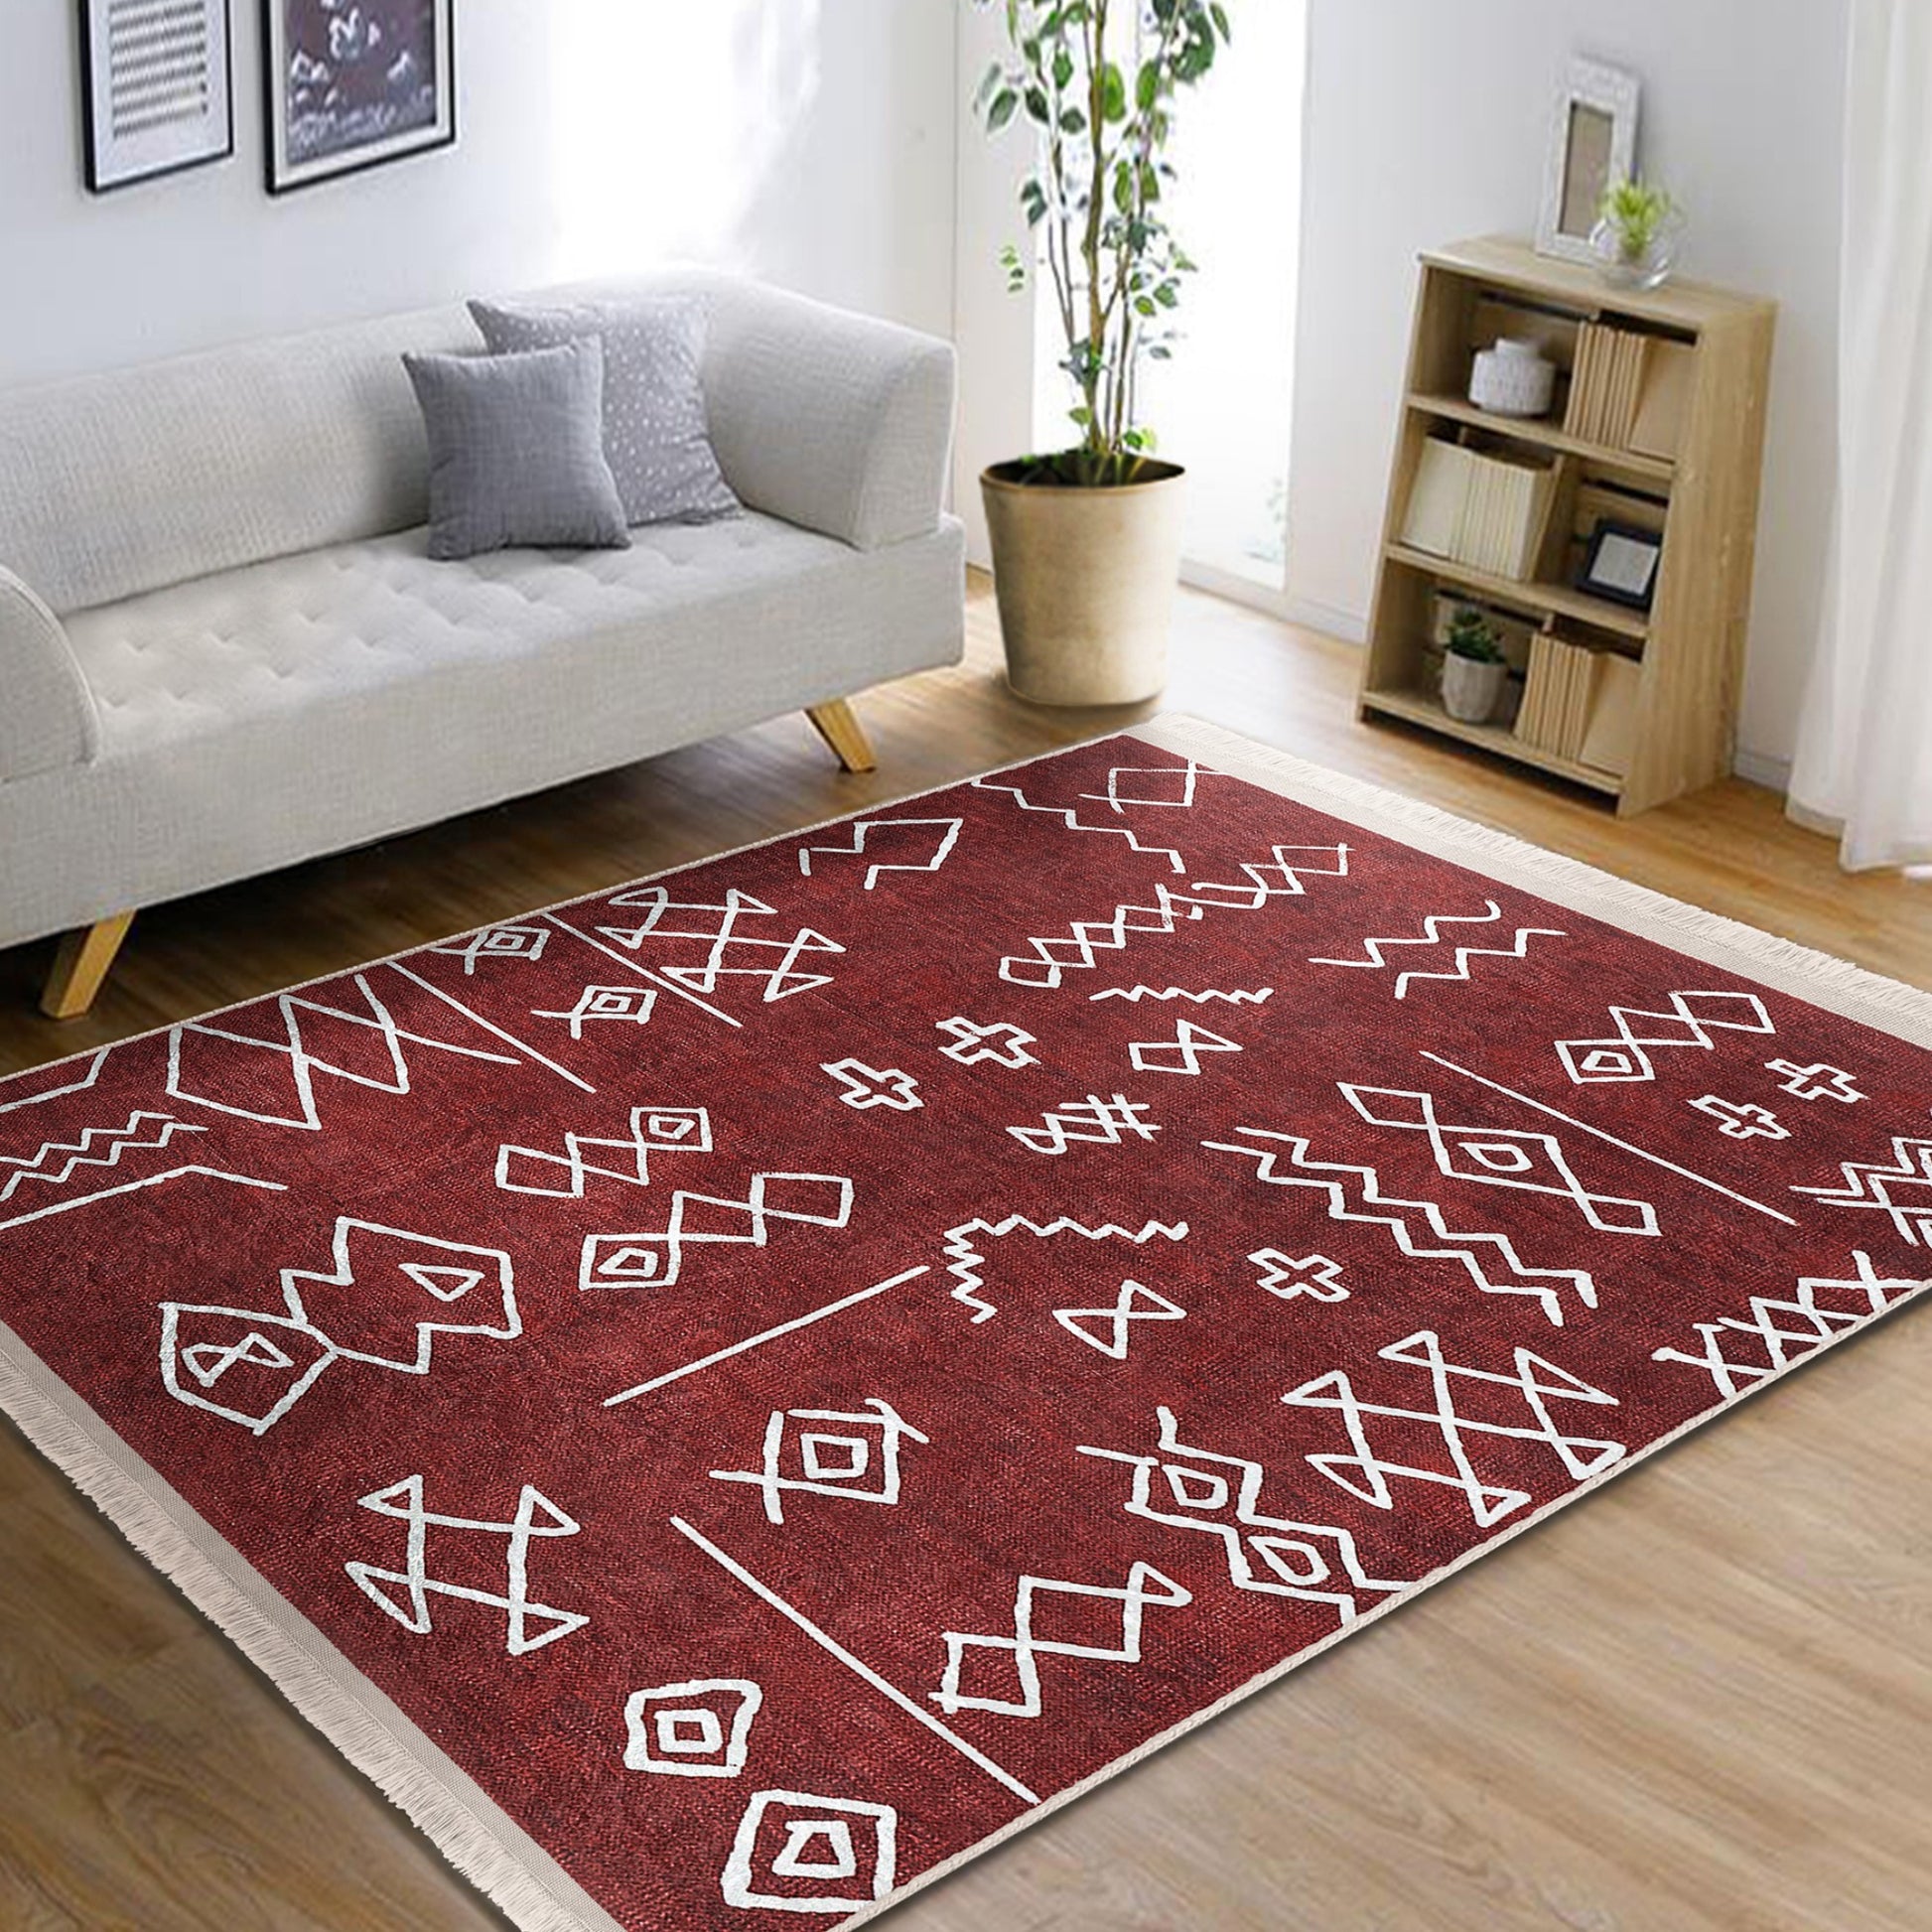 Classic Southwestern Rug for a Cozy and Stylish Living Space